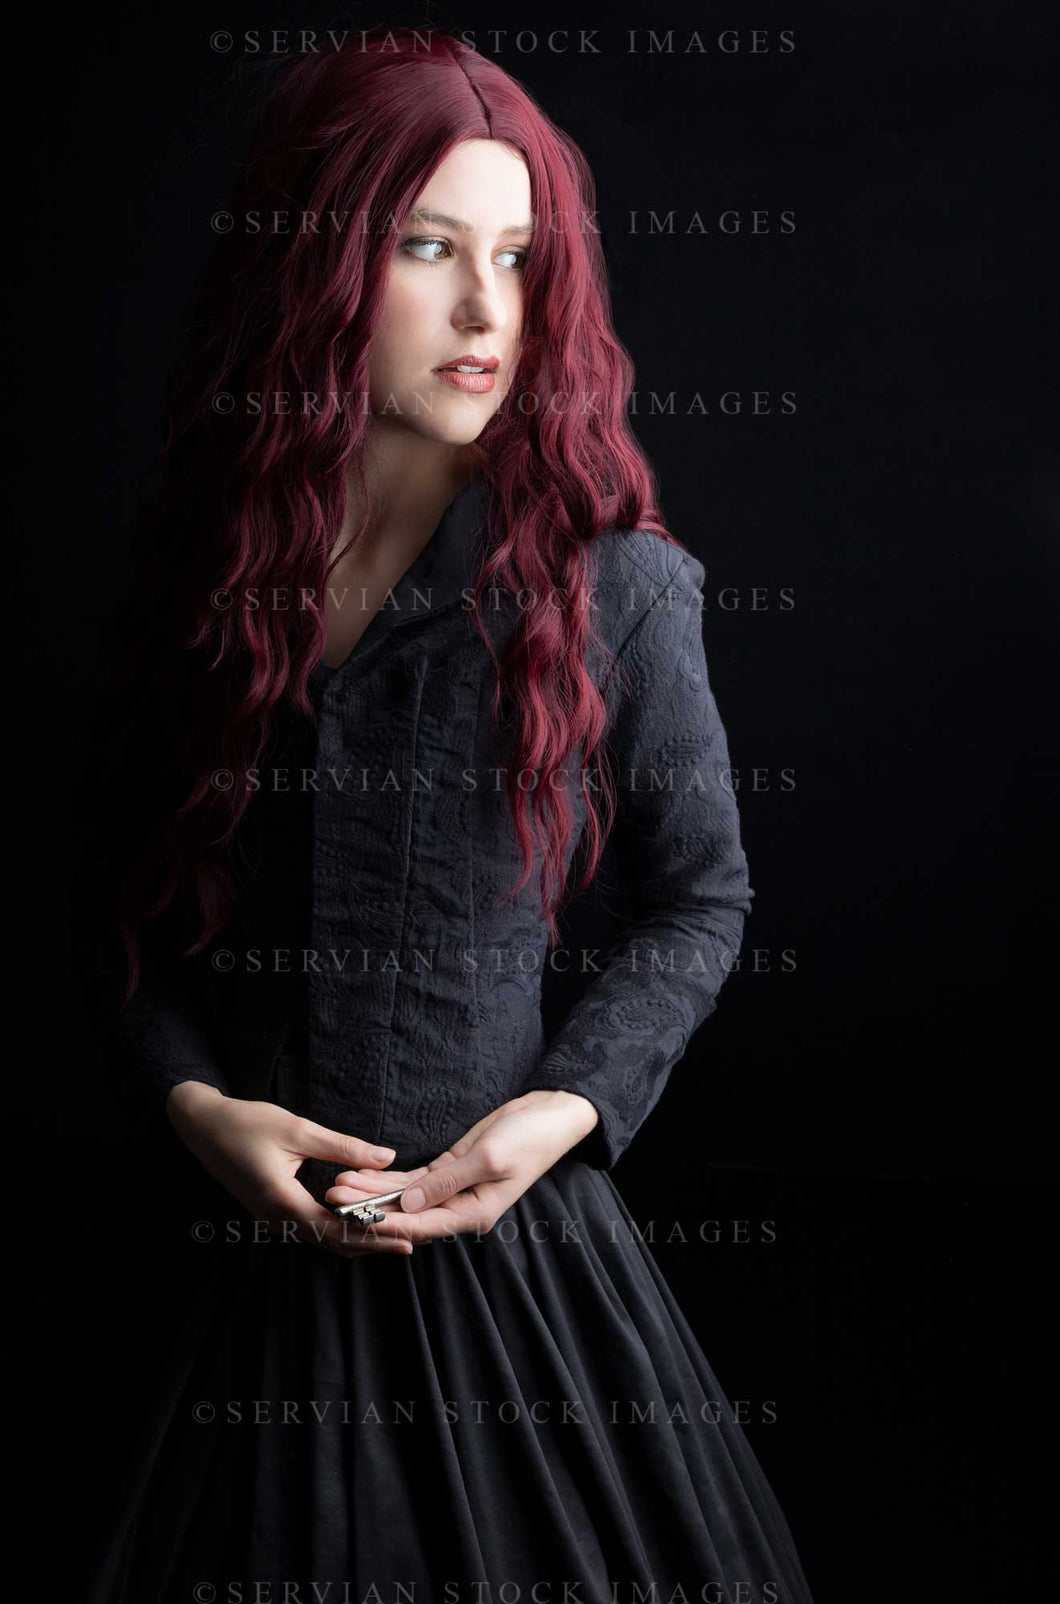 Victorian woman with long red hair wearing a black bodice and skirt against a black backdrop and holding an antique key. She could also be a witch or a ghost. (Amalia 0846)